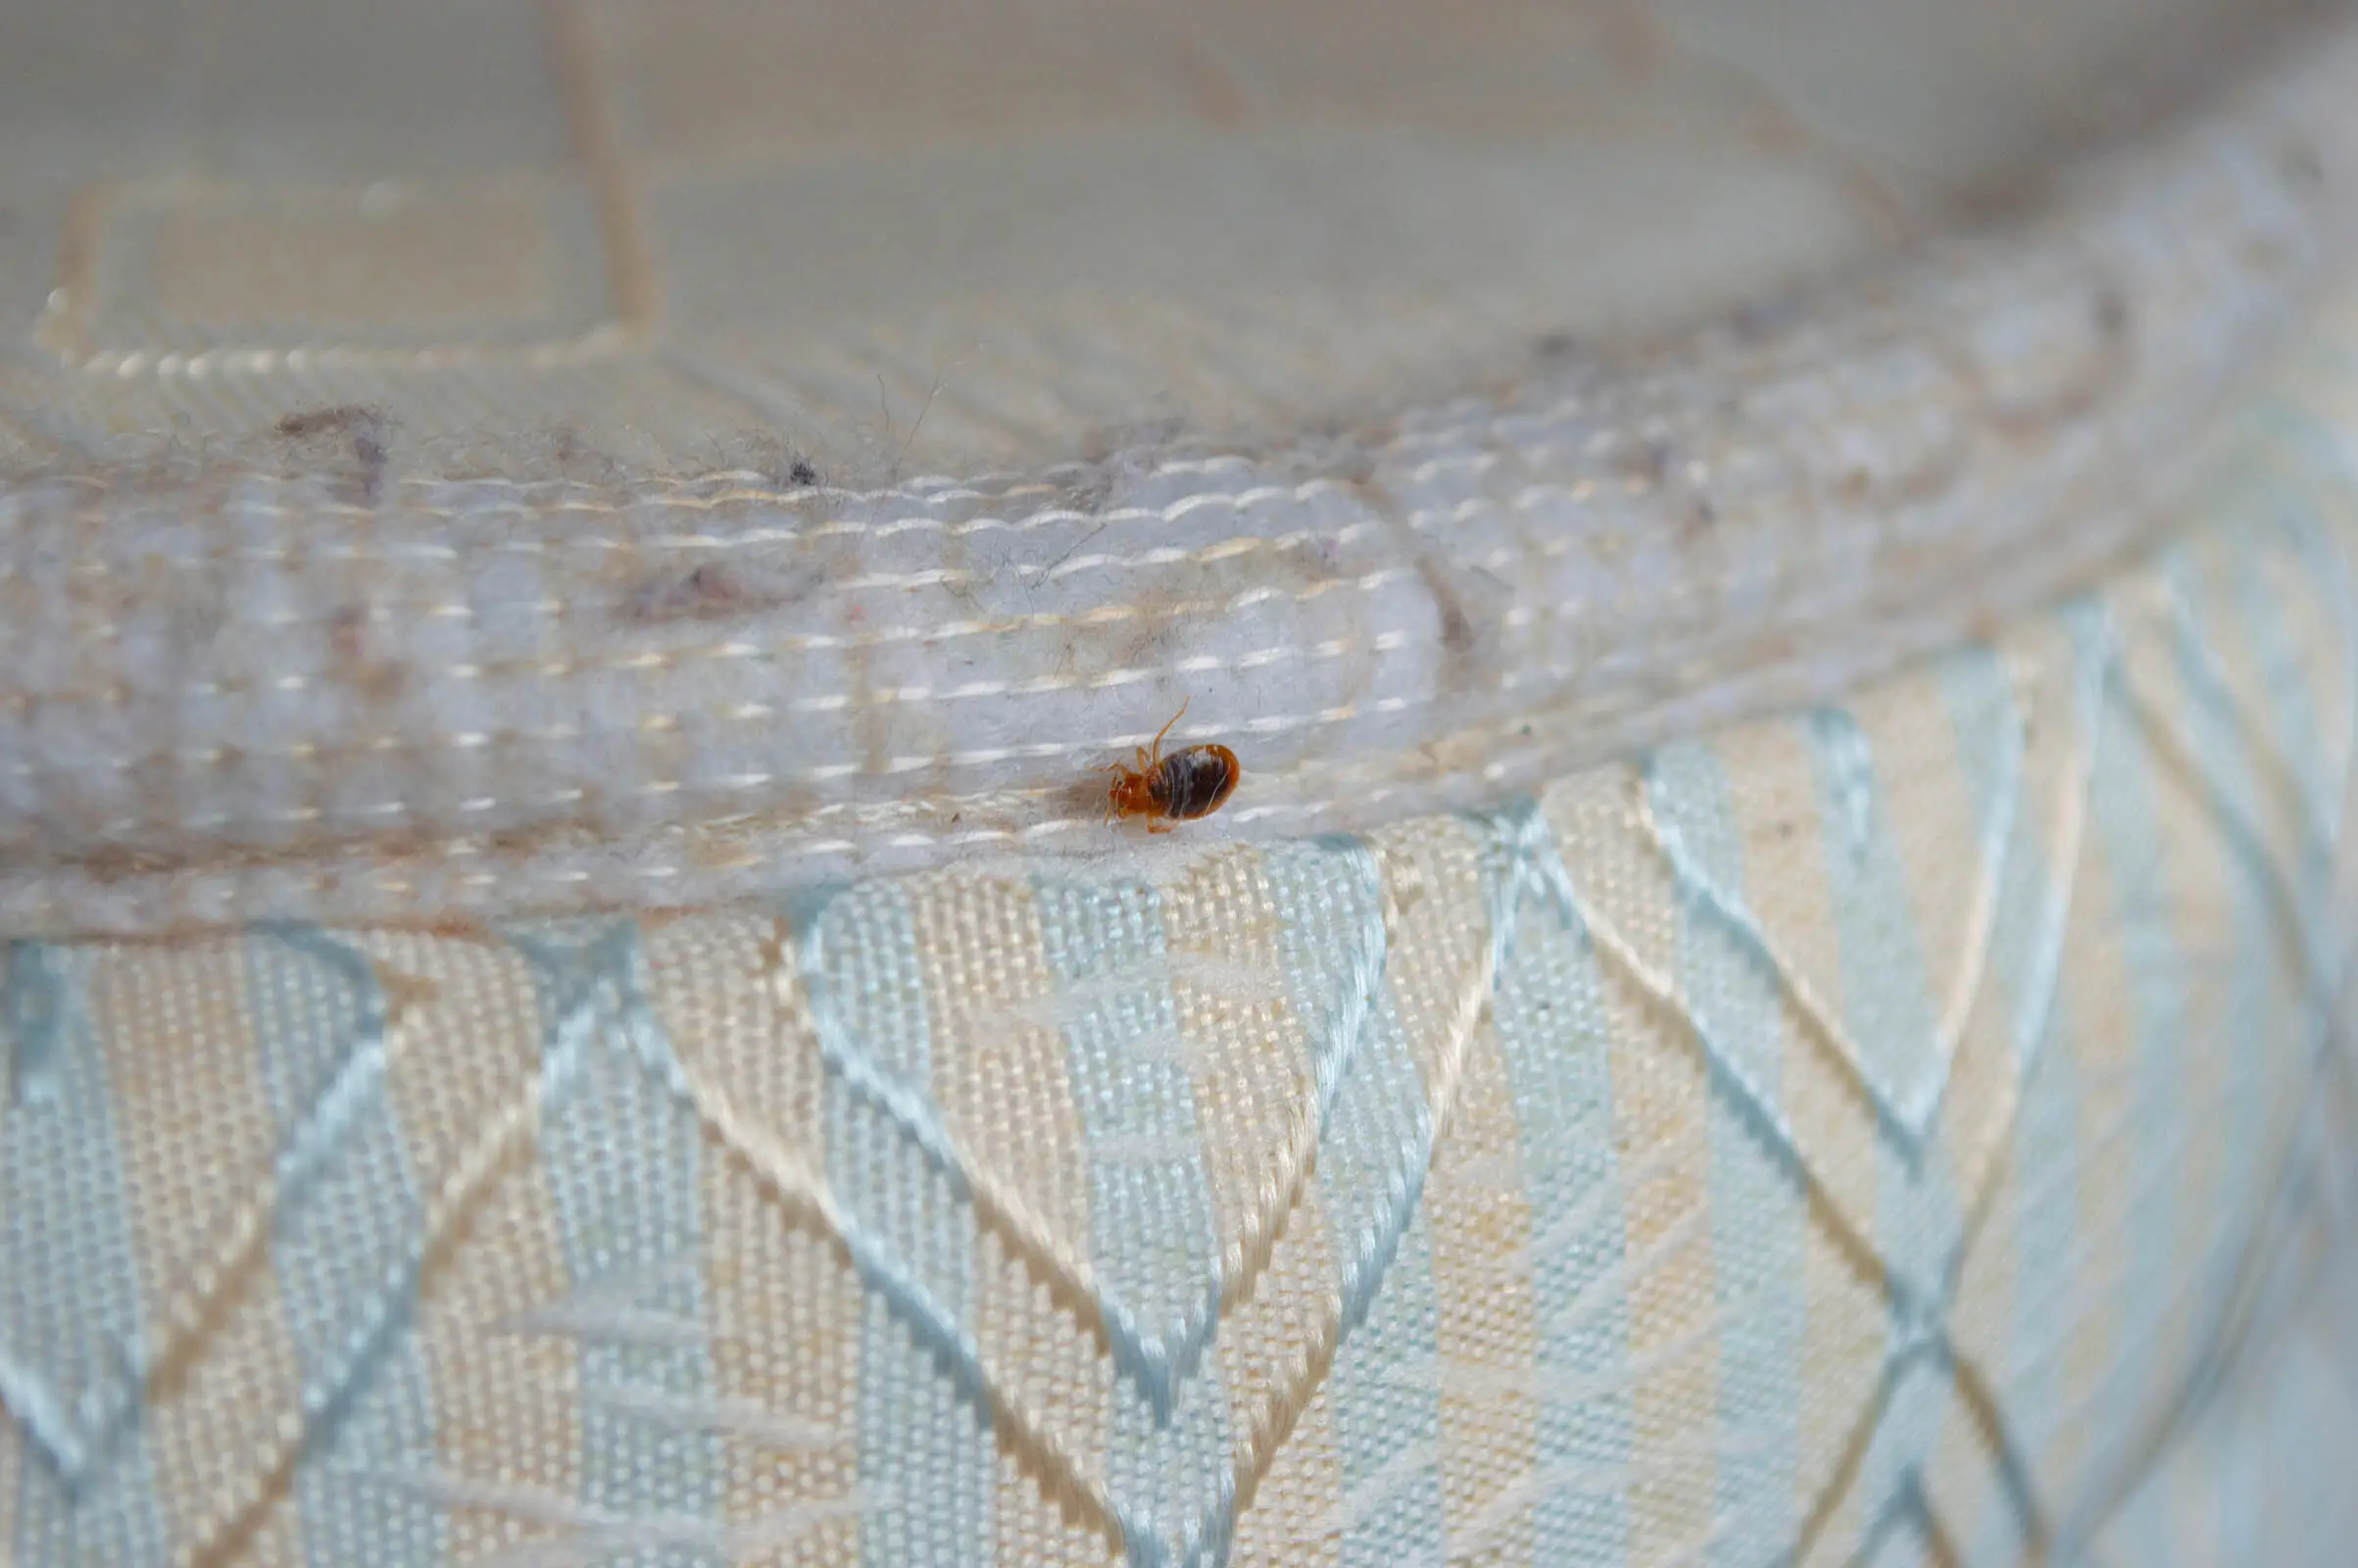 When Does Bed Bugs Lay Eggs?